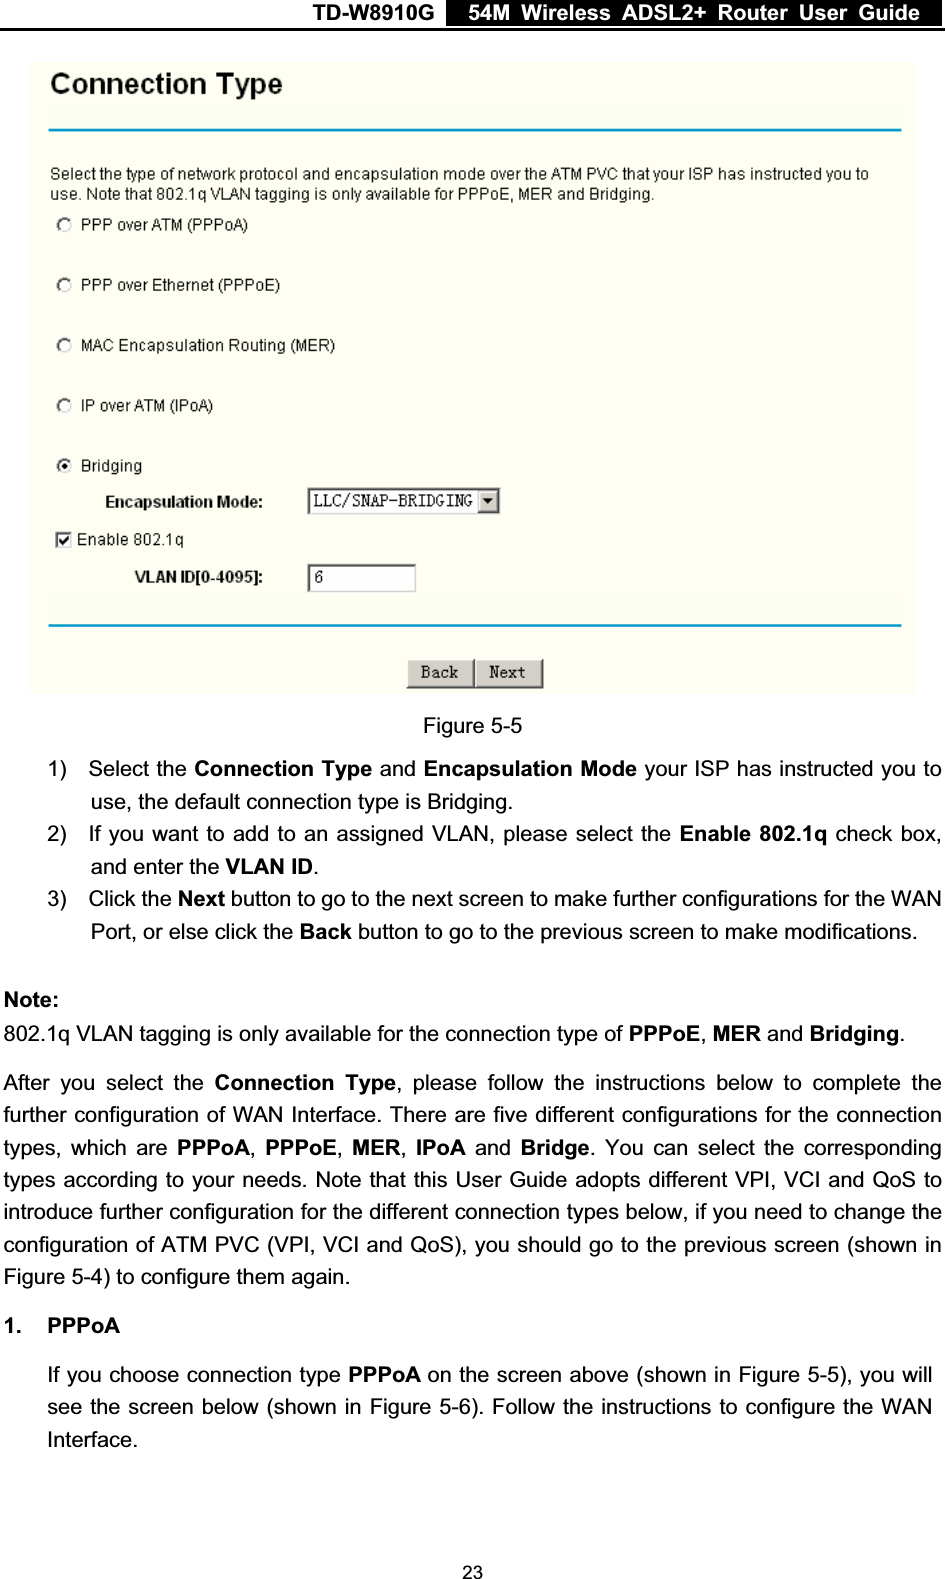 TD-W8910G    54M Wireless ADSL2+ Router User Guide  Figure 5-5 1) Select the Connection Type and Encapsulation Mode your ISP has instructed you to use, the default connection type is Bridging. 2)  If you want to add to an assigned VLAN, please select the Enable 802.1q check box, and enter the VLAN ID.3) Click the Next button to go to the next screen to make further configurations for the WAN Port, or else click the Back button to go to the previous screen to make modifications. Note:802.1q VLAN tagging is only available for the connection type of PPPoE,MER and Bridging.After you select the Connection Type, please follow the instructions below to complete the further configuration of WAN Interface. There are five different configurations for the connection types, which are PPPoA,PPPoE,MER,IPoA and Bridge. You can select the corresponding types according to your needs. Note that this User Guide adopts different VPI, VCI and QoS to introduce further configuration for the different connection types below, if you need to change the configuration of ATM PVC (VPI, VCI and QoS), you should go to the previous screen (shown in Figure 5-4) to configure them again. 1. PPPoAIf you choose connection type PPPoA on the screen above (shown in Figure 5-5), you will see the screen below (shown in Figure 5-6). Follow the instructions to configure the WAN Interface. 23